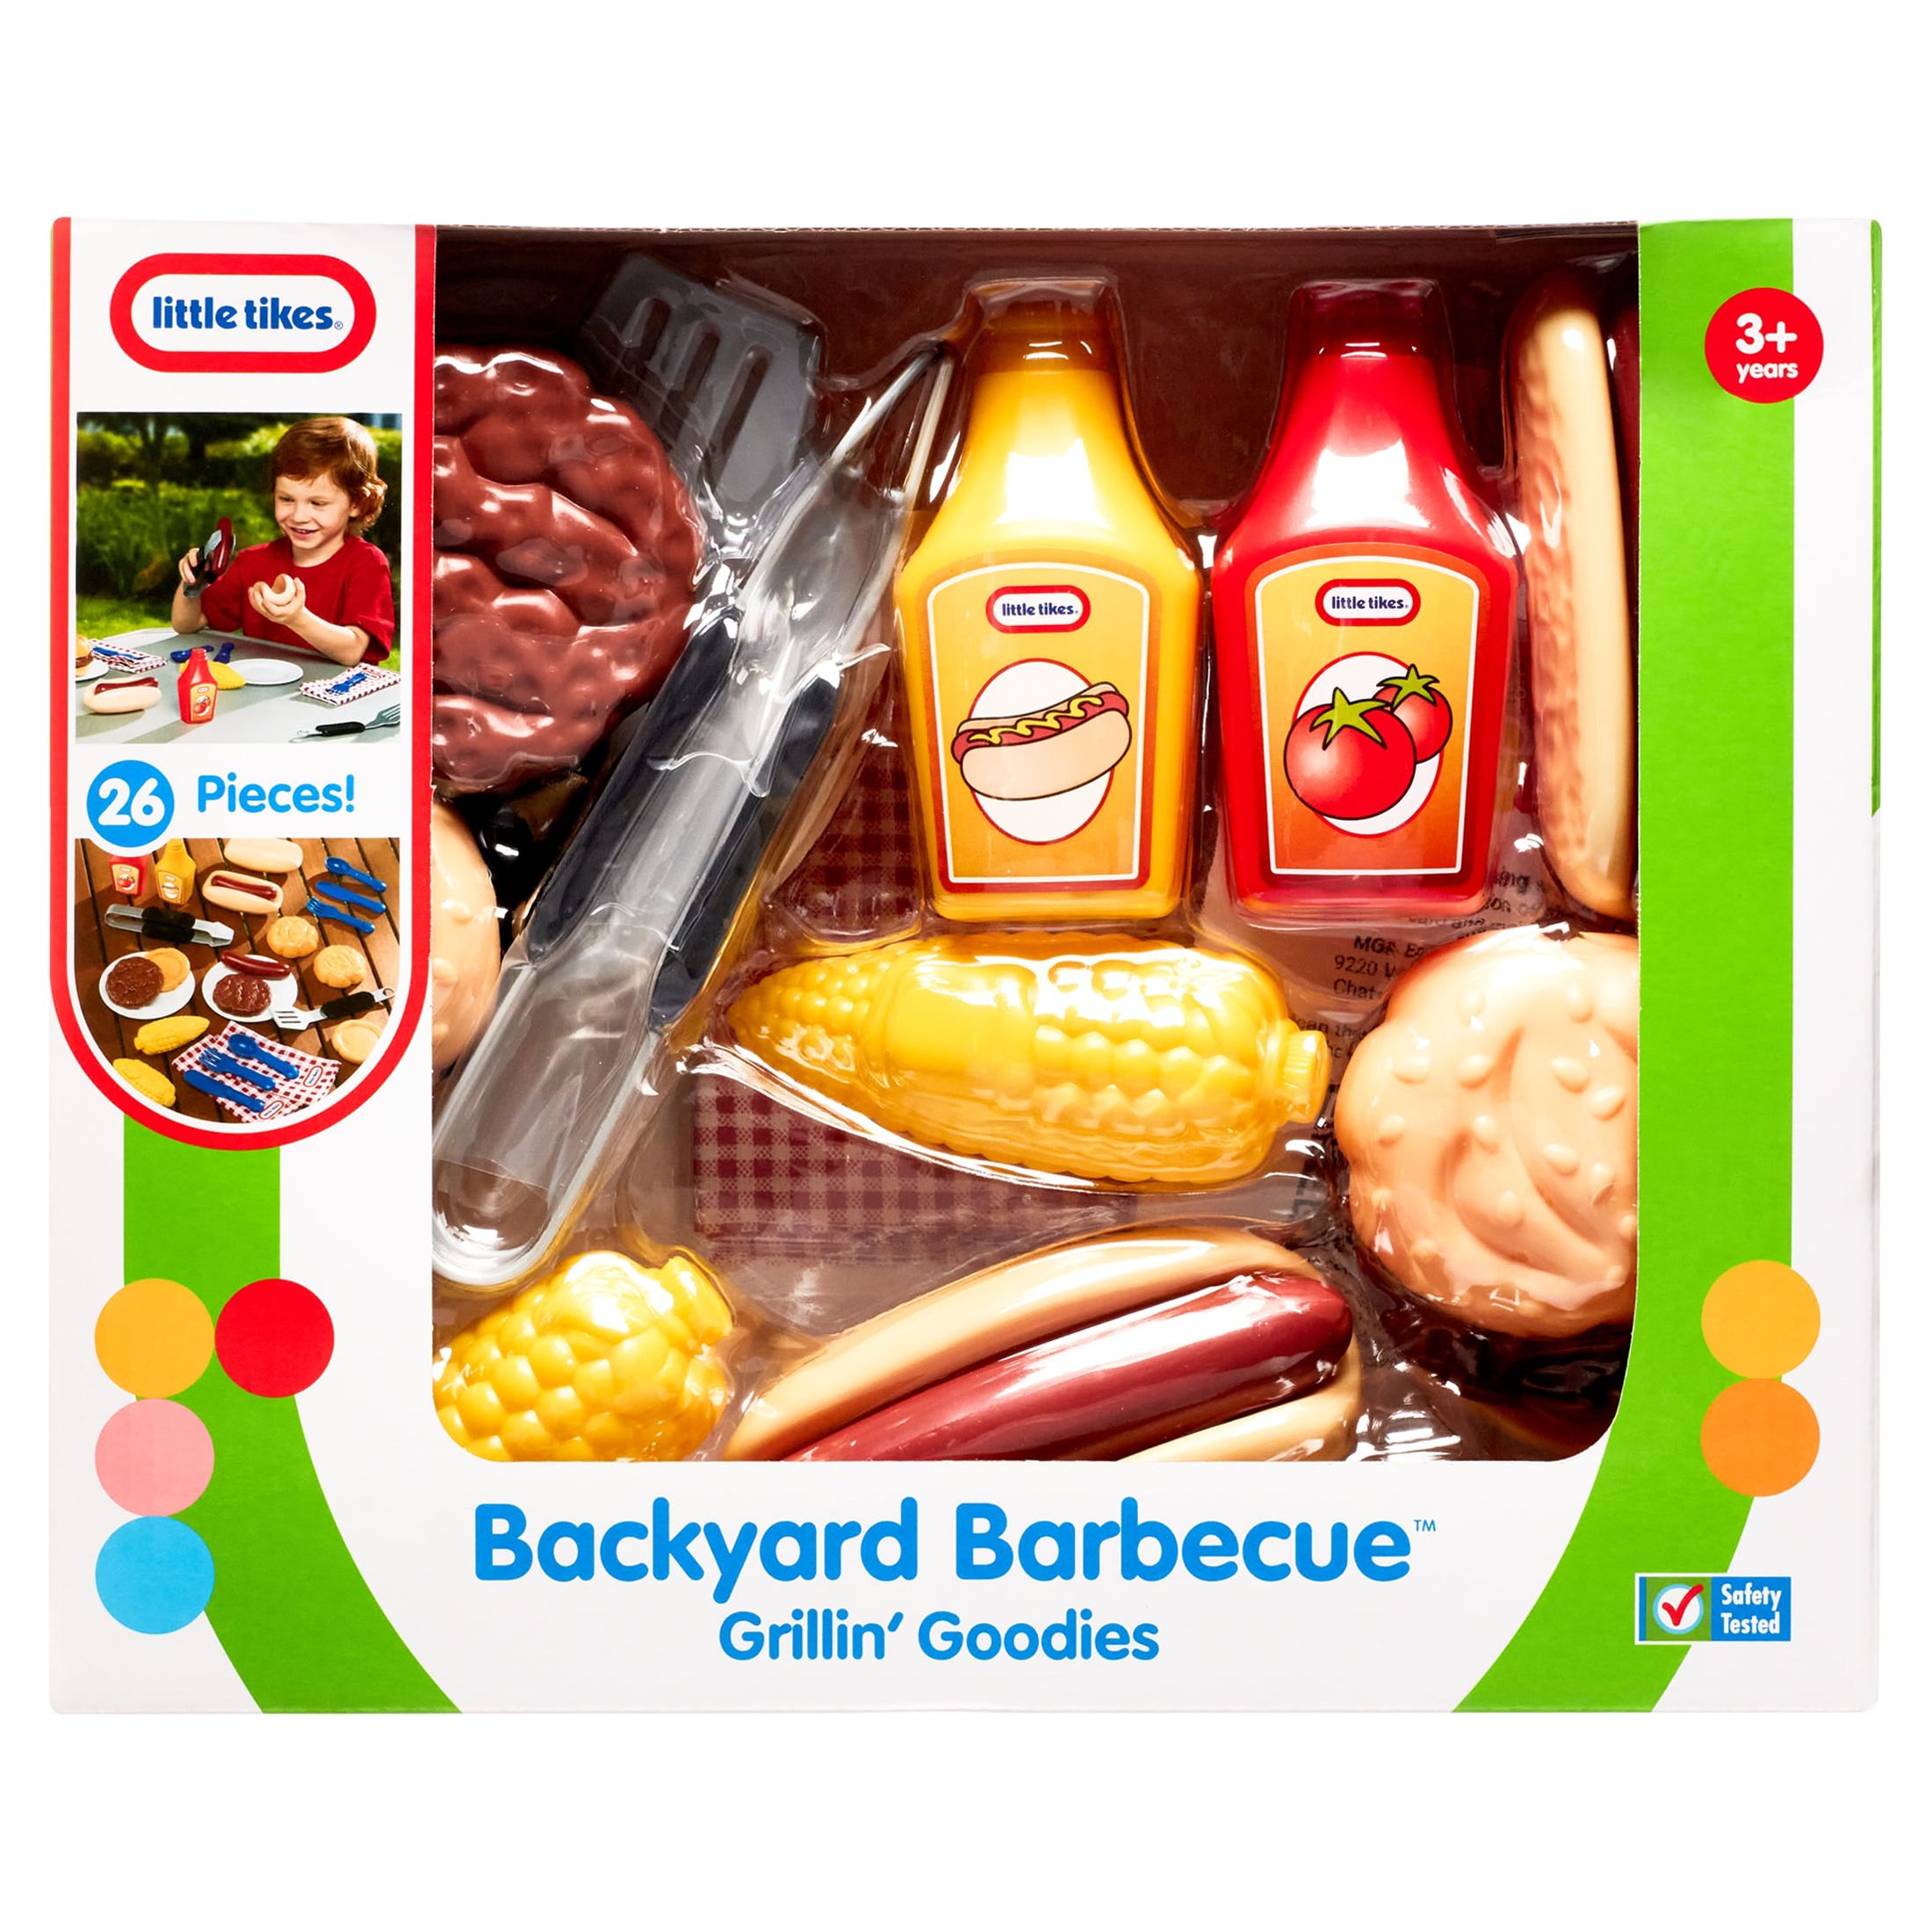 Little Tikes Backyard Barbeque, 26- Piece Plastic Play Food Toys Pretend Play Set, Grillin' Goodies for Picnic Pretend Play, Multicolor- for Kids Toddlers Girls Boys Ages 3 4 5+ - image 1 of 8